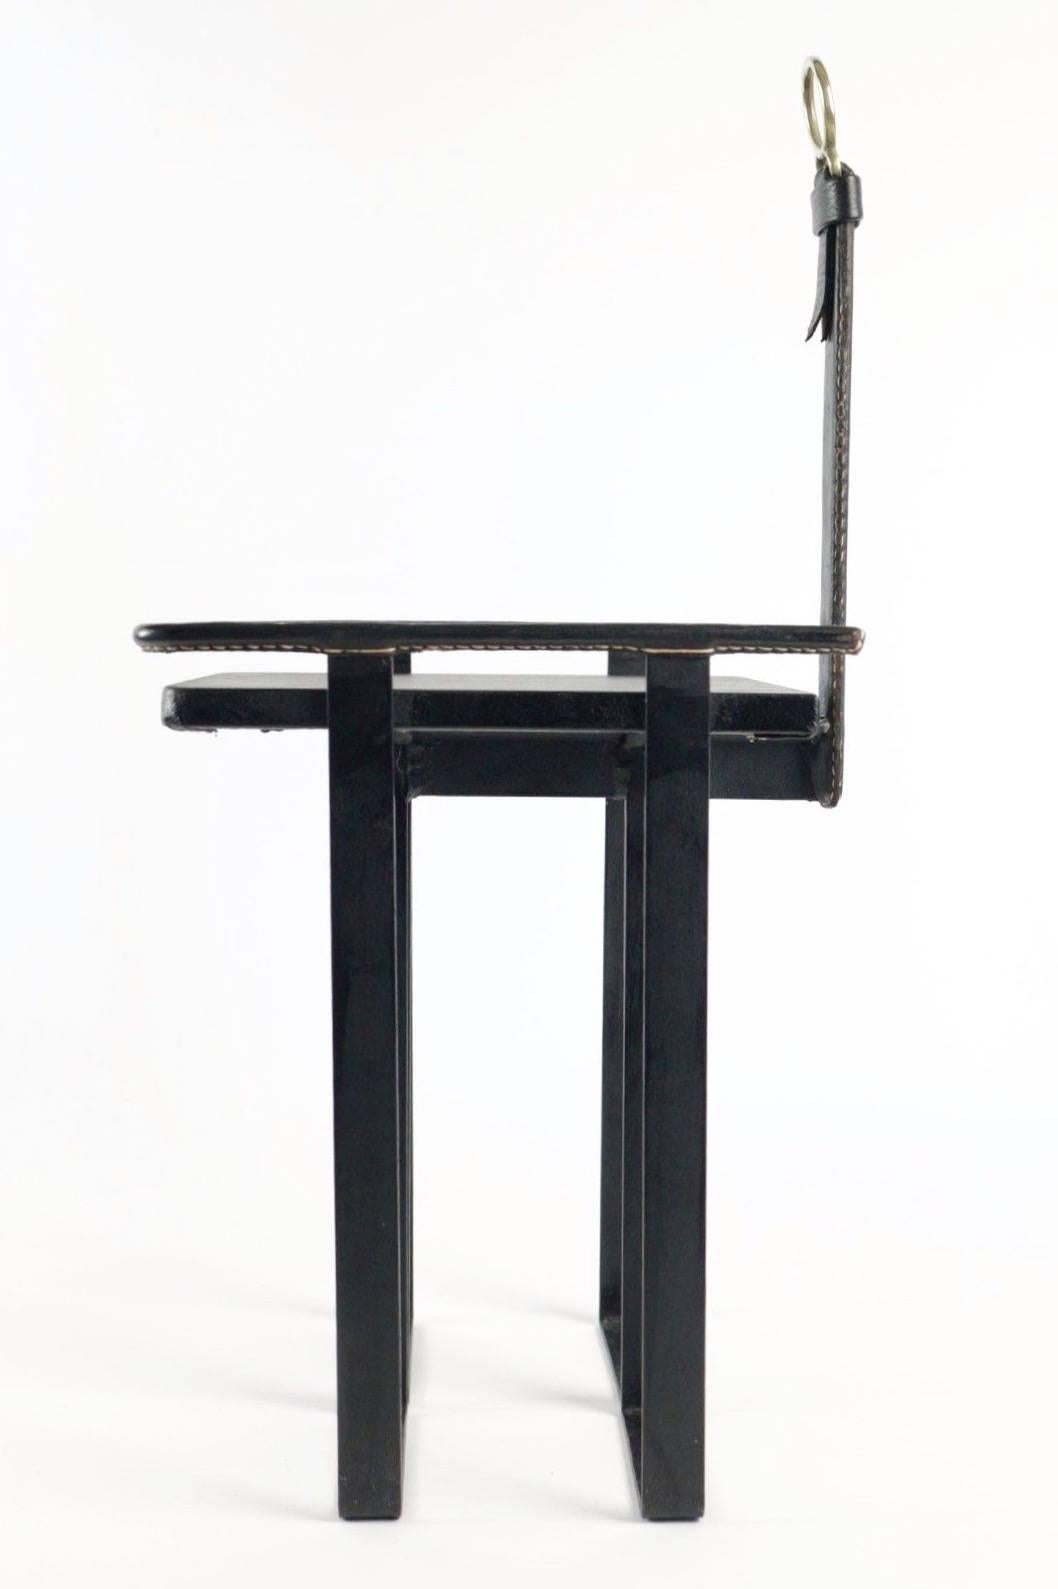 Rare leather and iron table by French designer Jacques Adnet. Perfect table for your phone or books. Black leather in excellent vintage condition with characteristic Adnet contrast stitching.